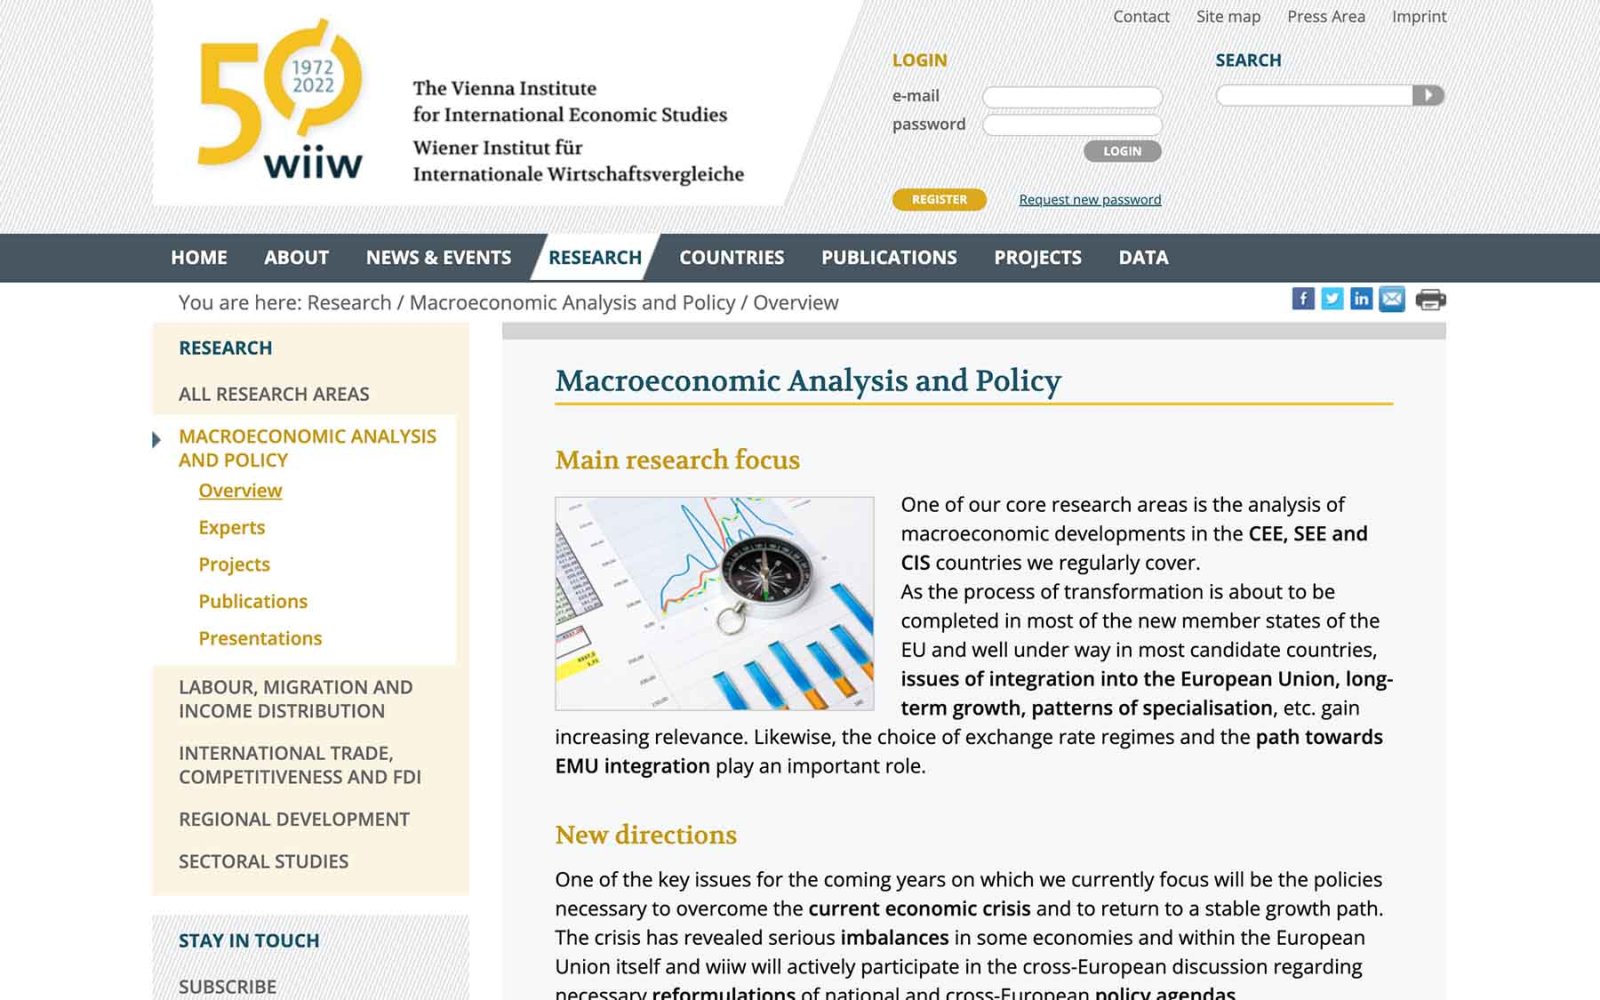 Website wiiw, The Vienna Institute for International Economic Studies – research